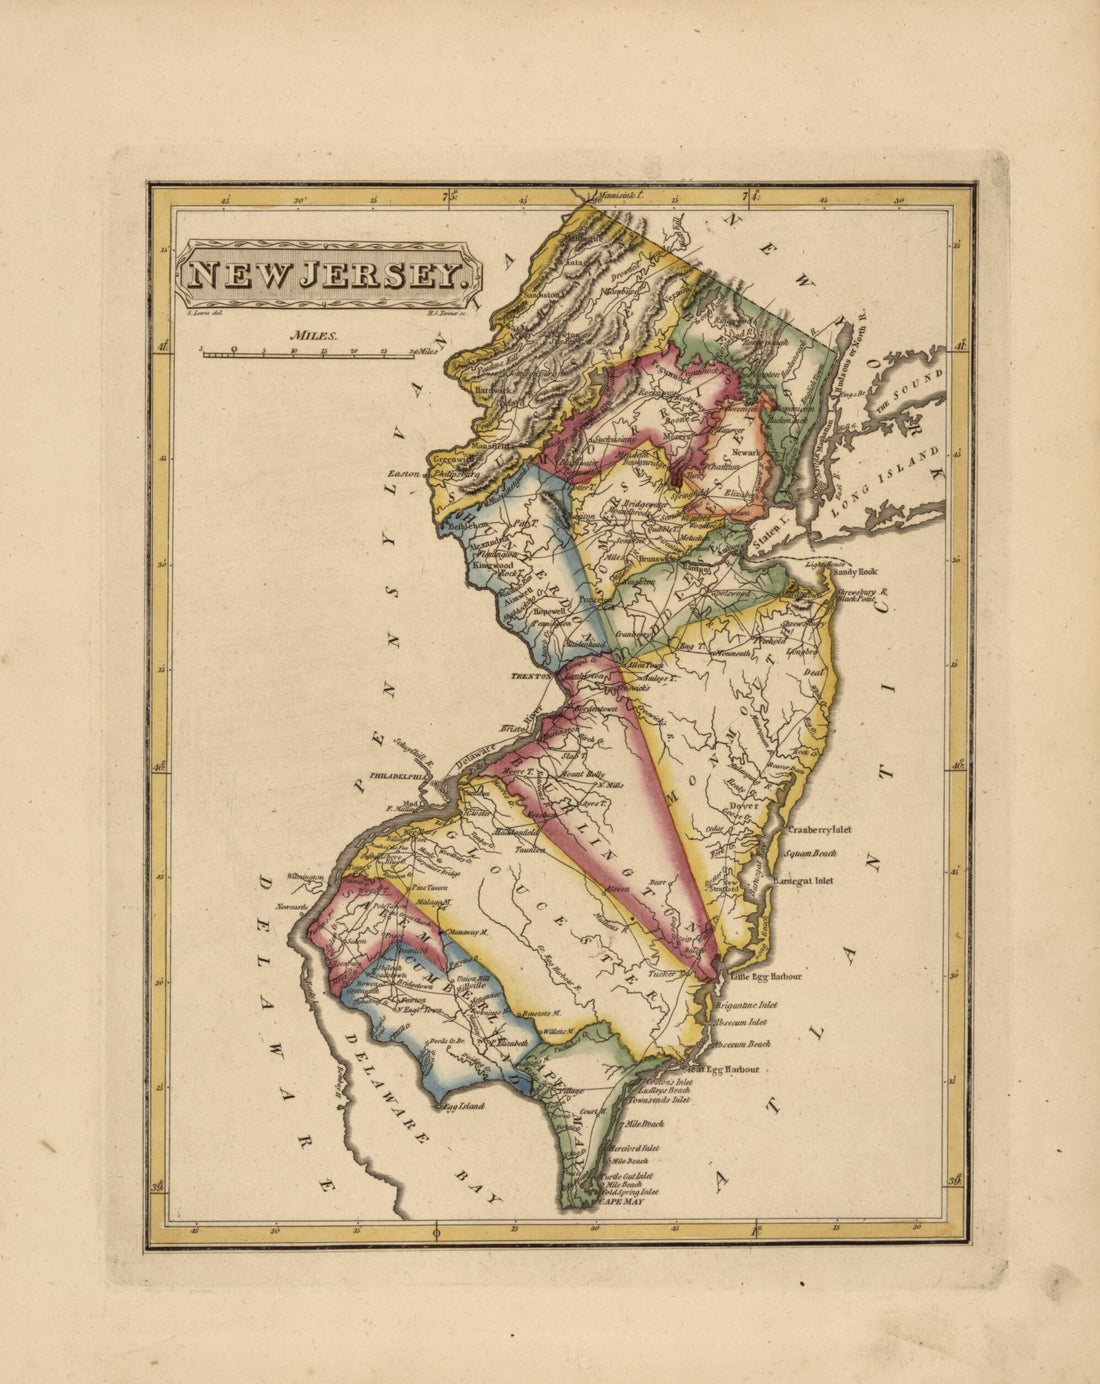 This old map of New Jersey from a New and Elegant General Atlas, Containing Maps of Each of the United States  from 1817 was created by Henry Schenck Tanner in 1817